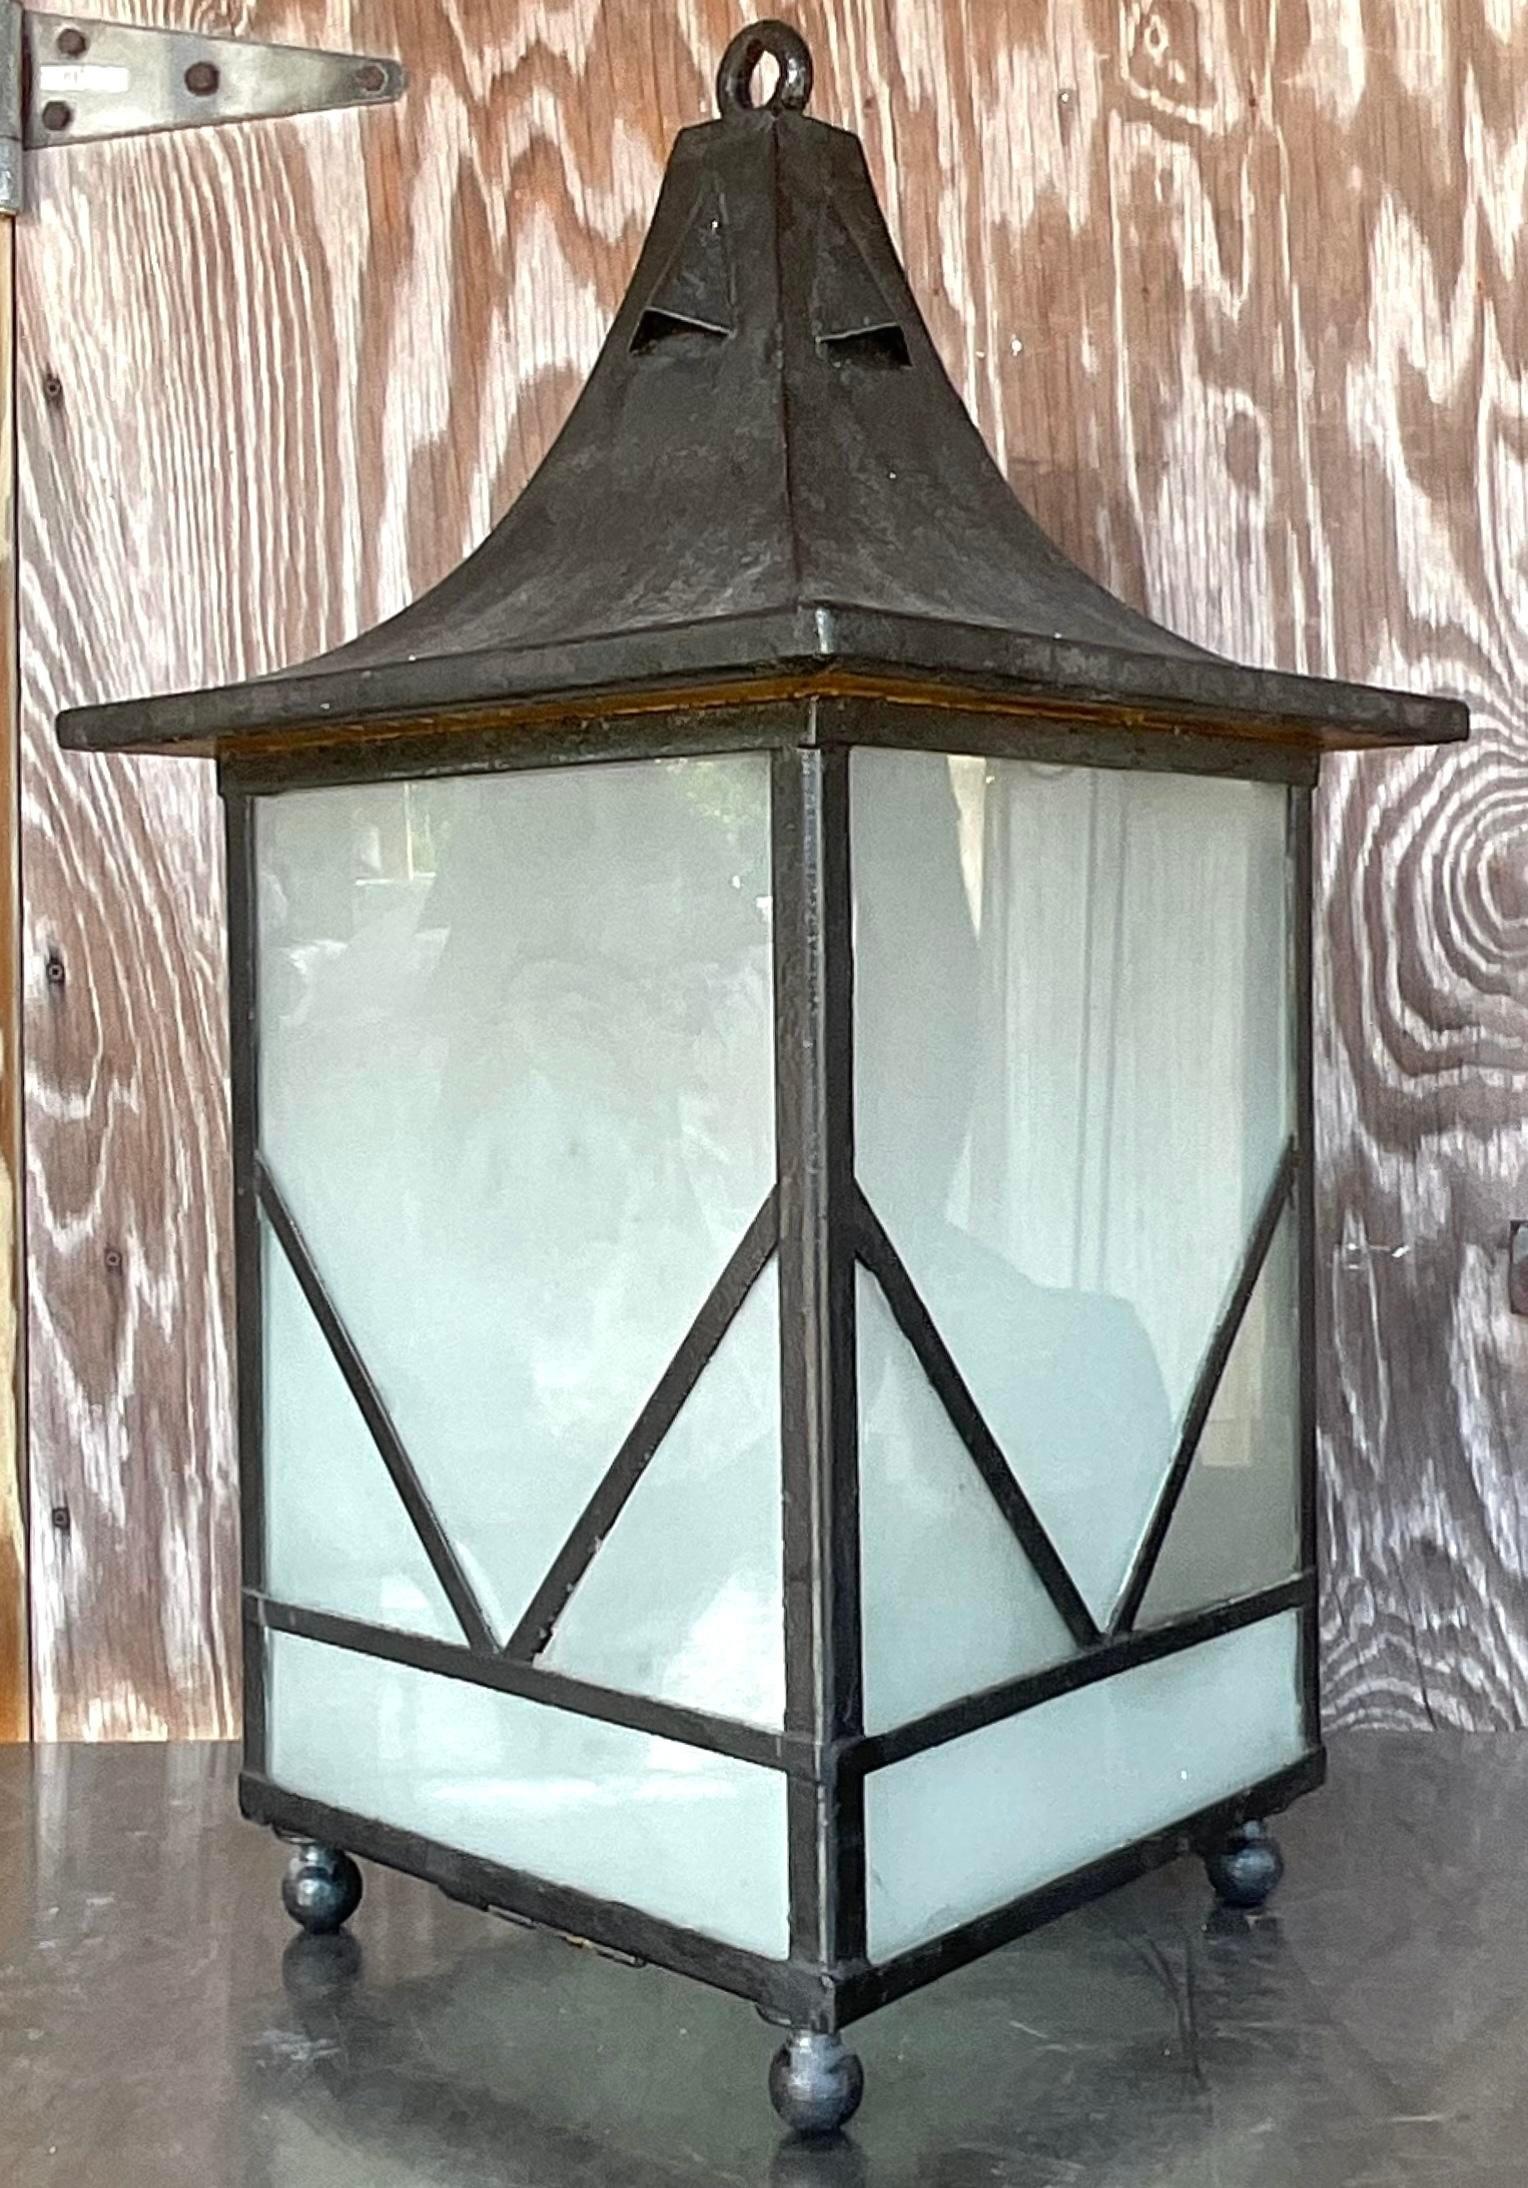 Iconic Illumination: The Vintage Boho Monumental Iron Lantern captures the essence of American style with its grandeur and timeless appeal. Crafted with precision and artistry, this iron masterpiece adds a touch of vintage charm to any space,